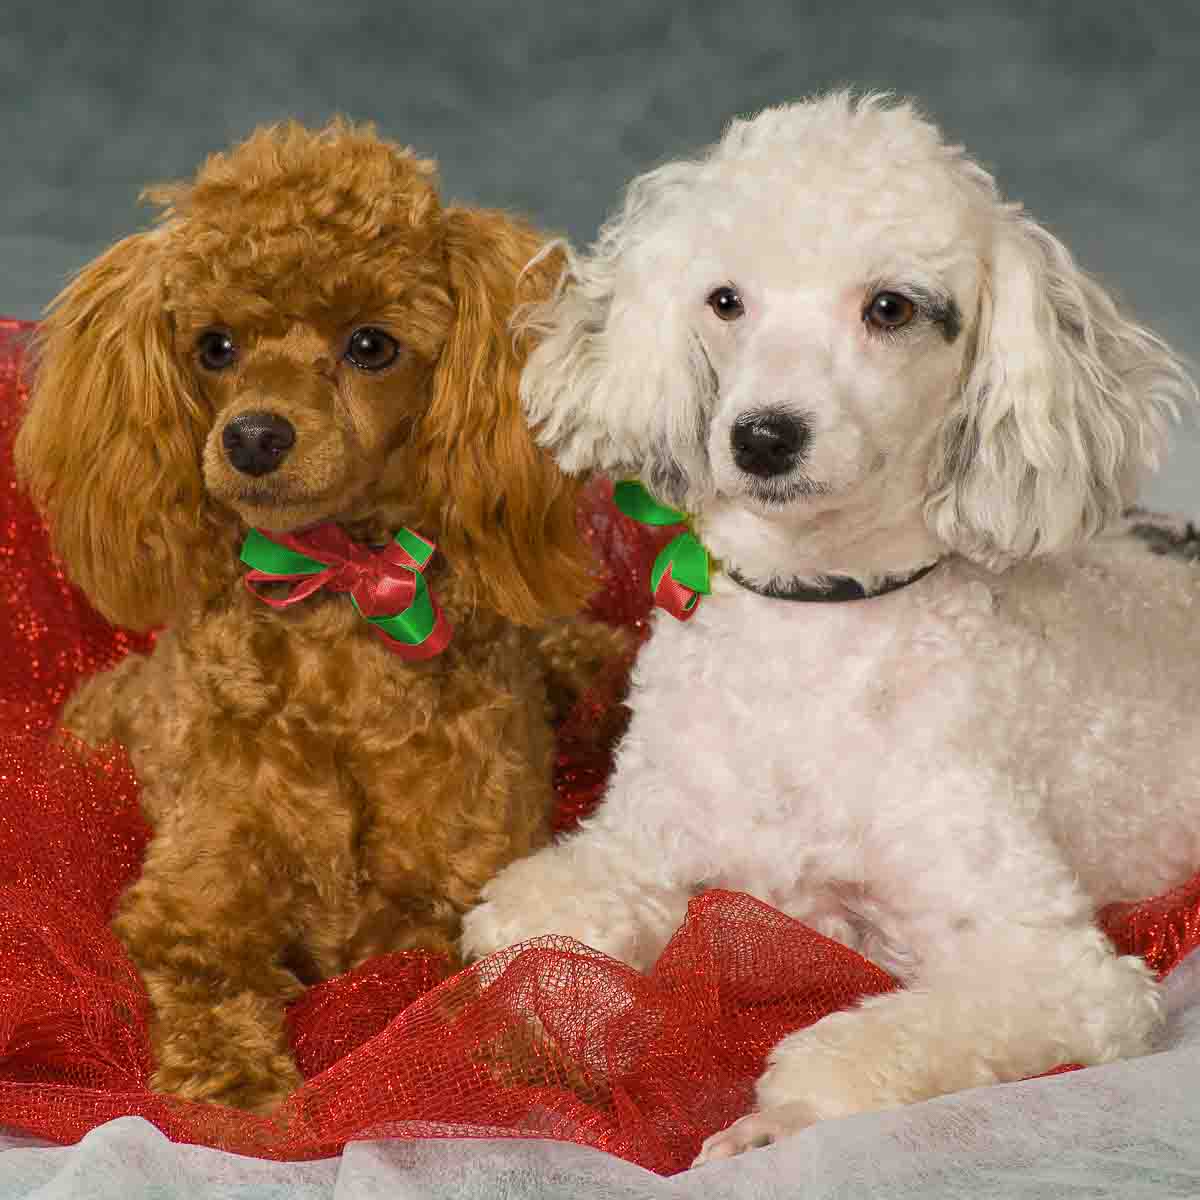 Two dogs sitting on a red blanket with green ribbon.